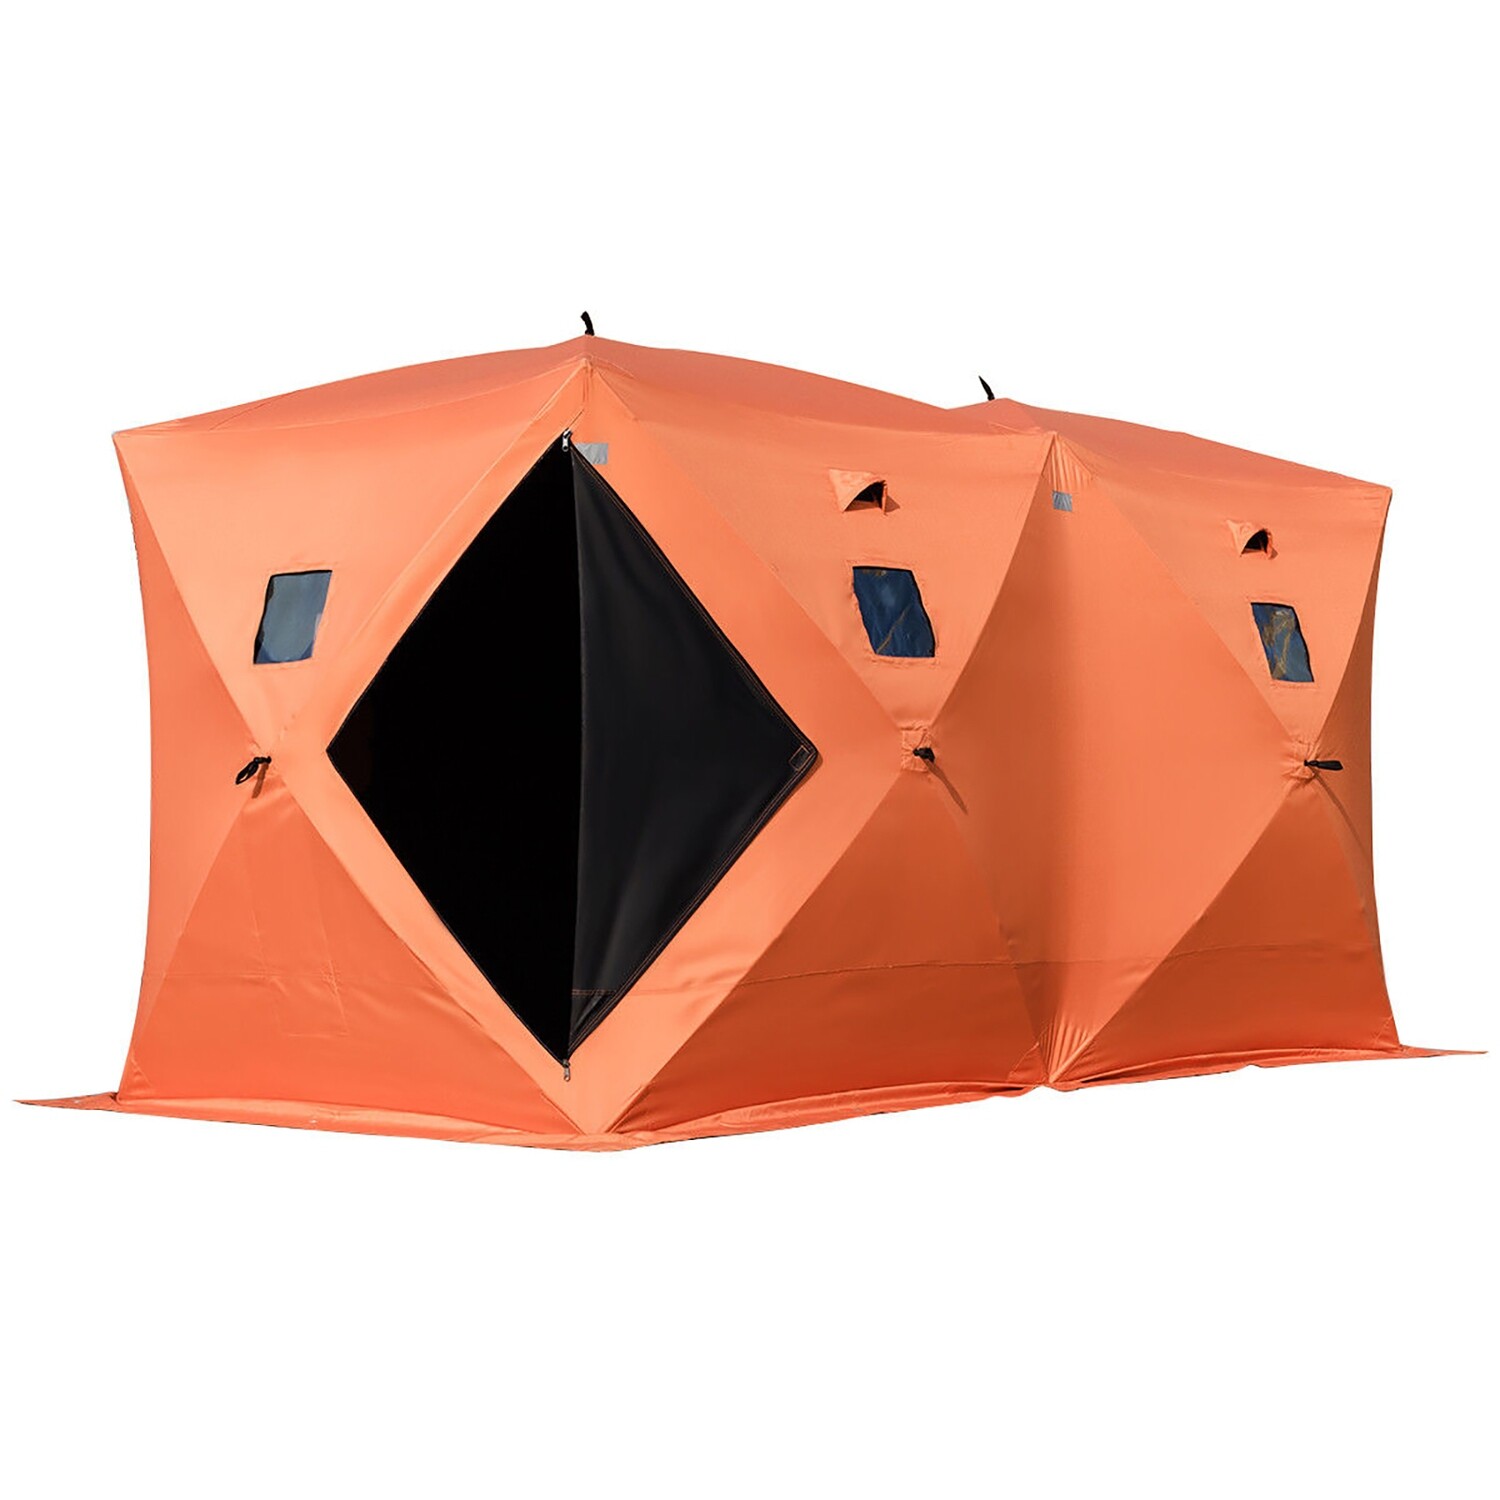 Portable Ice Shelter made of 300d Oxford Fabric for 8 People